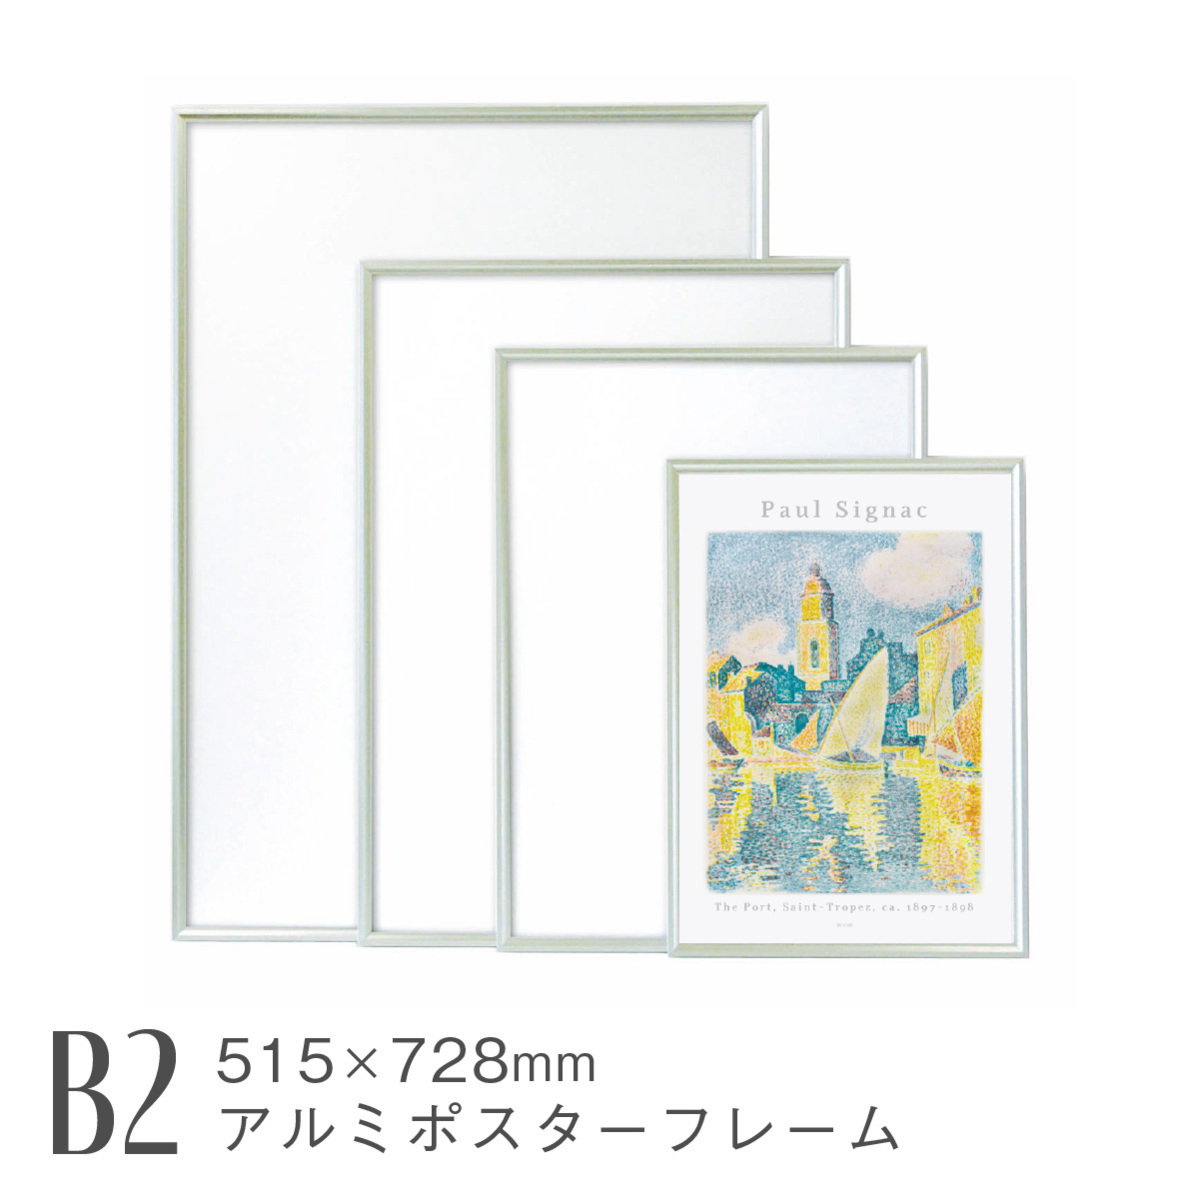 One-touch B2 Silver Poster Frame Aluminum Frame Picture Frame Large Extra Large Exhibition Painting AR-ON-B2, Art Supplies, Picture Frame, Poster Frame